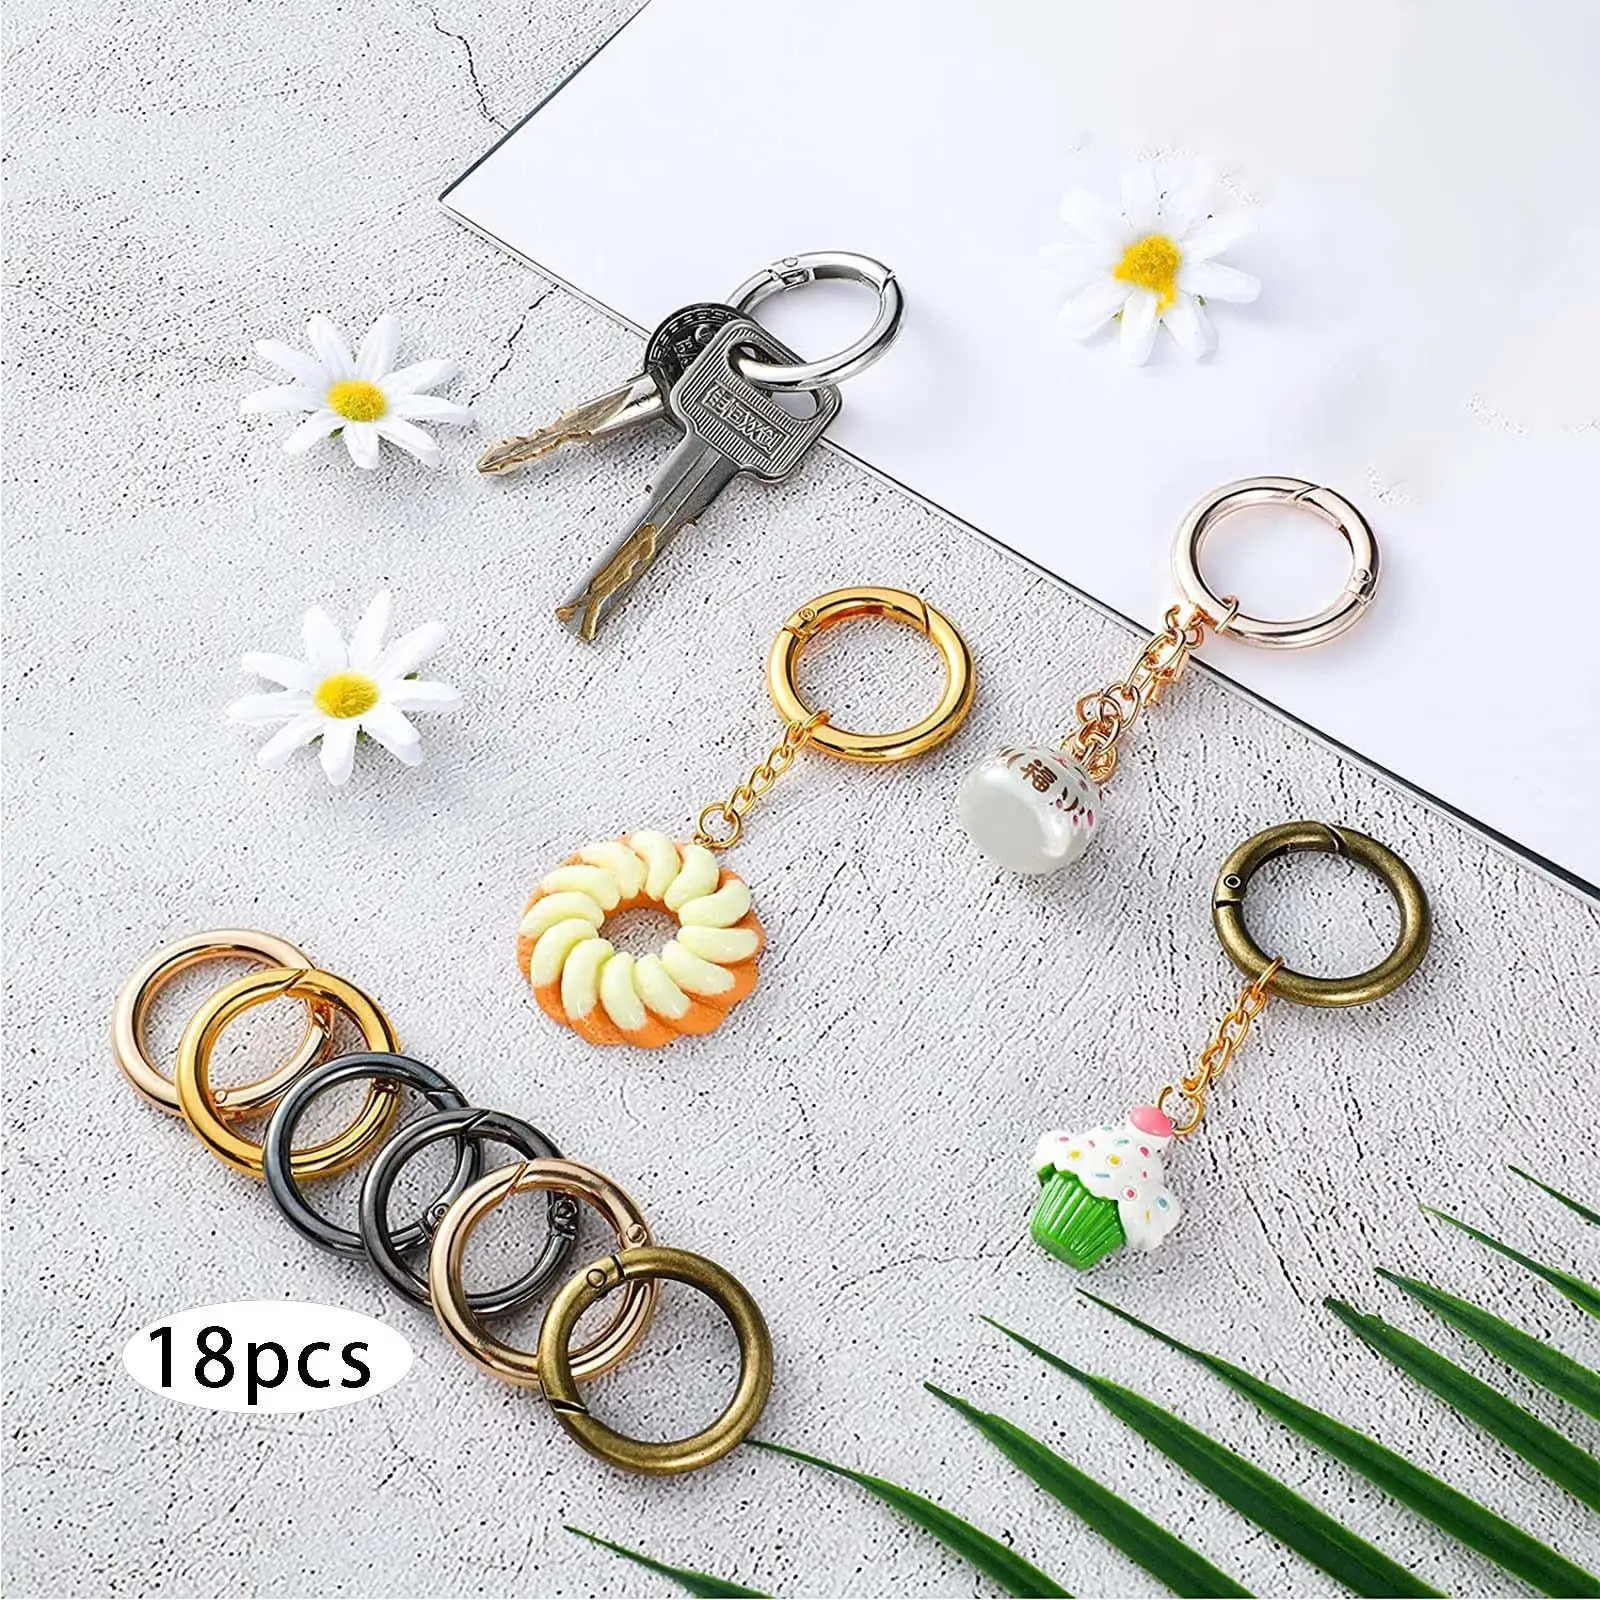 18Pcs Spring Gate O Rings Spring Clip Round Carabiner Snap Clip Push Gate Snap Hook Keyring Buckle Metal for Jewelry Making Bag